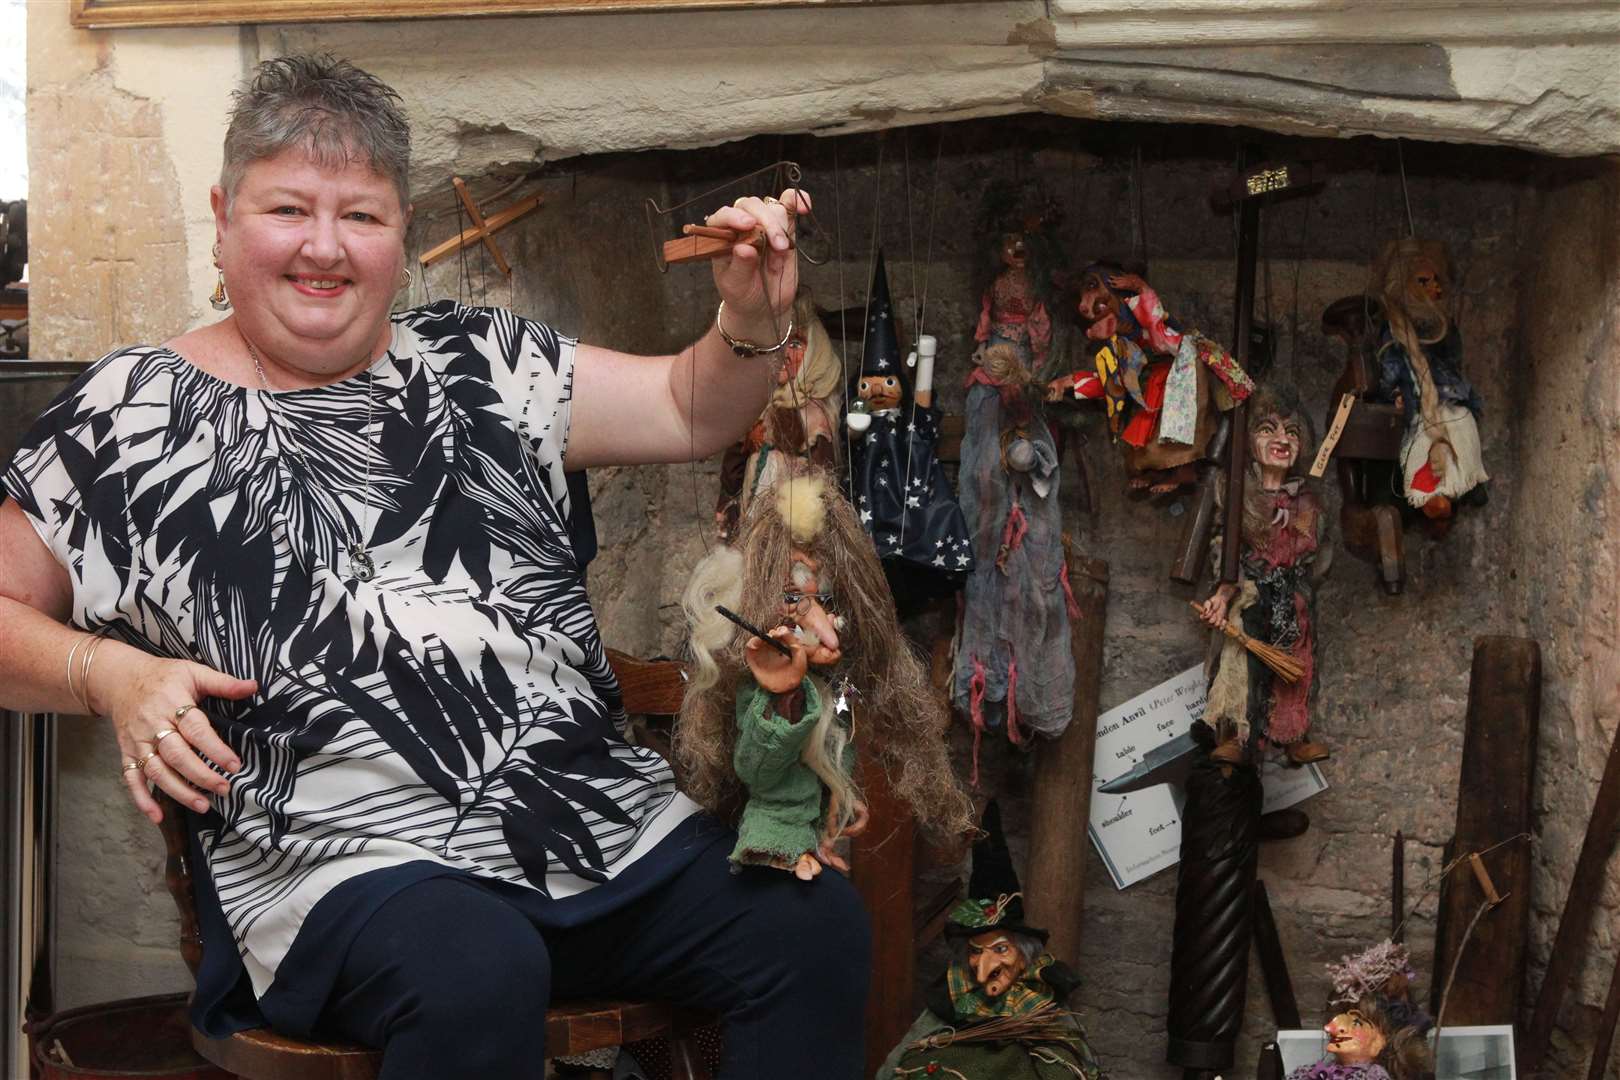 Karen Crowder with her collection of witches. Picture by: John Westhrop